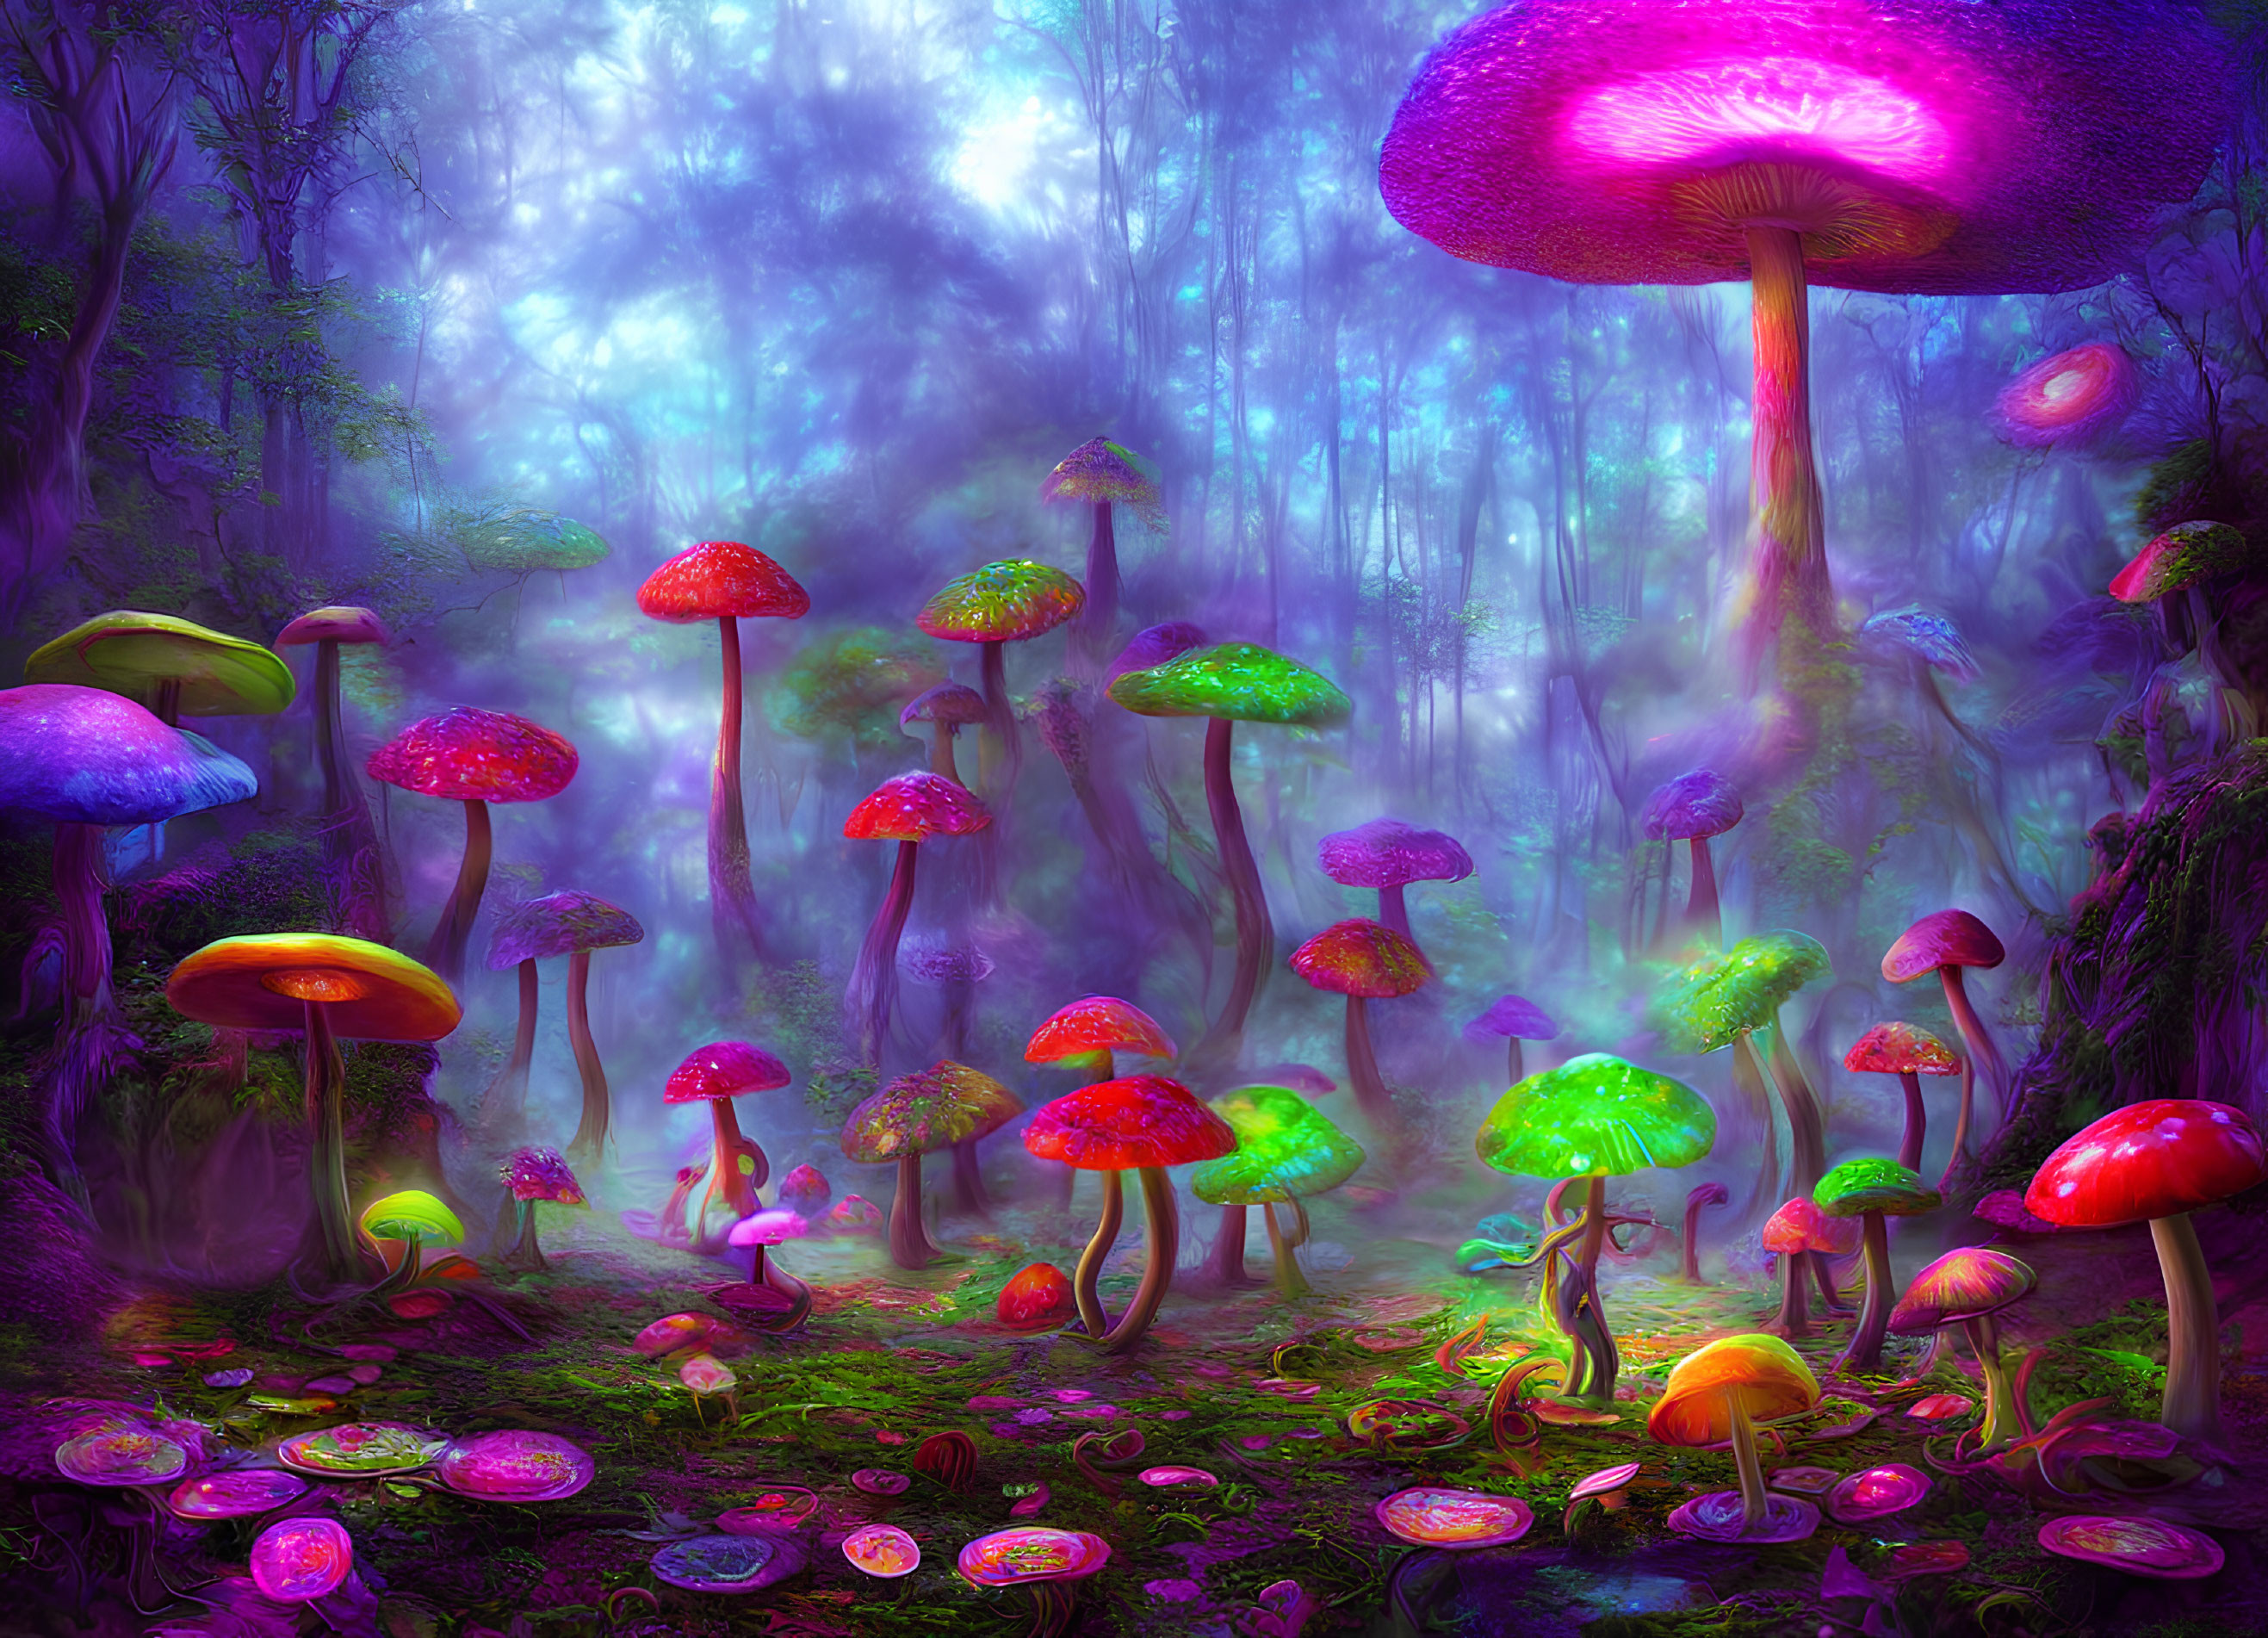 Colorful oversized mushrooms in mystical forest under purple-tinted sky